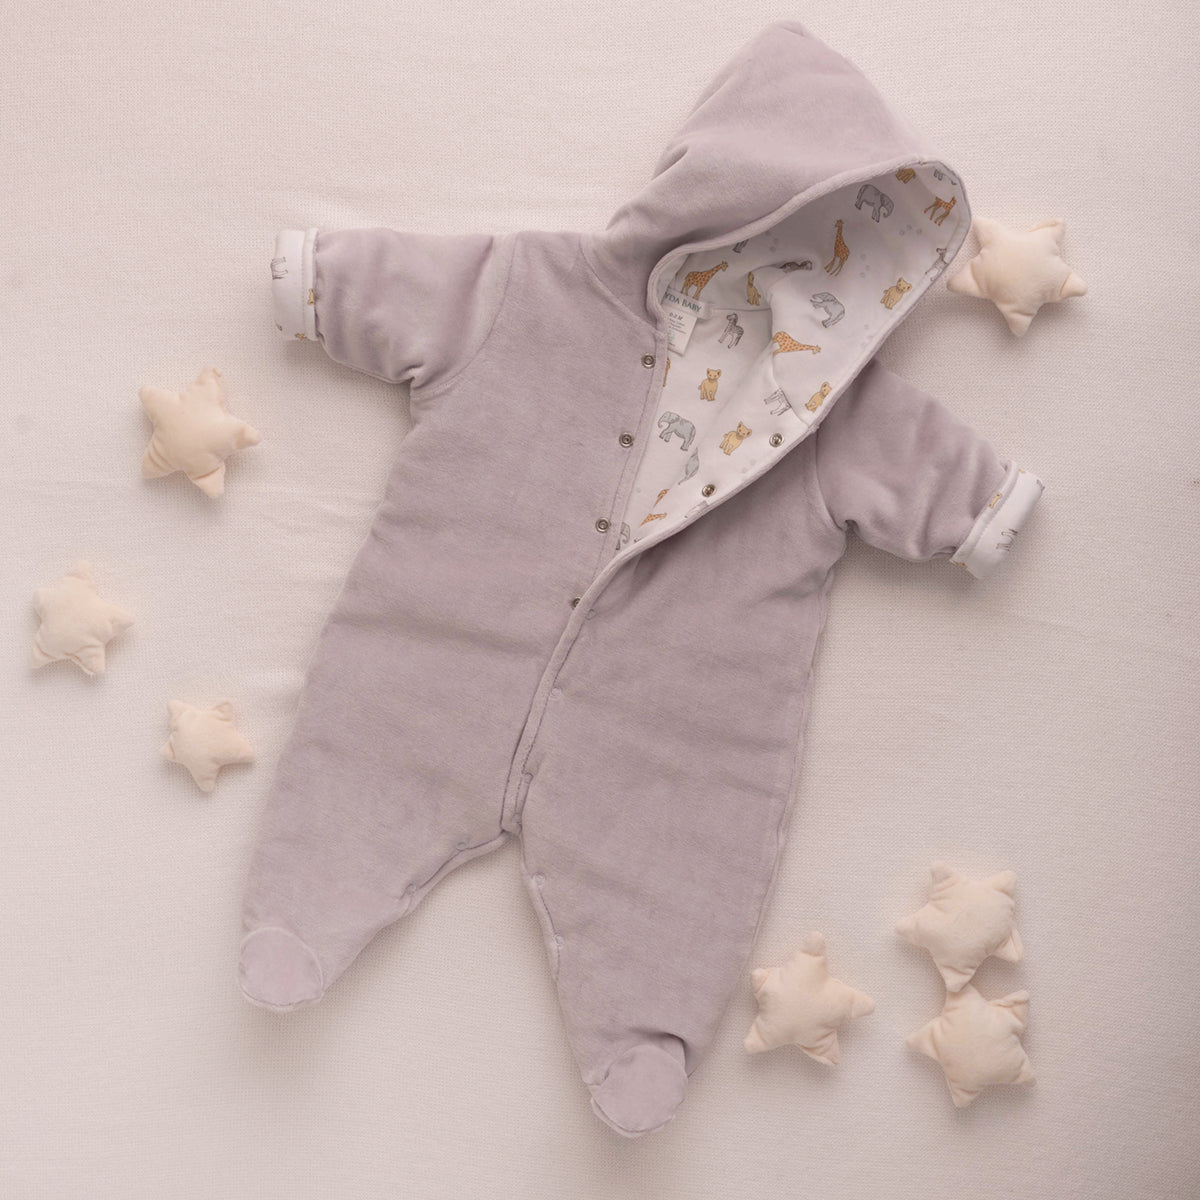 The Ultimate Guide to Christmas Clothing Gifts for Babies